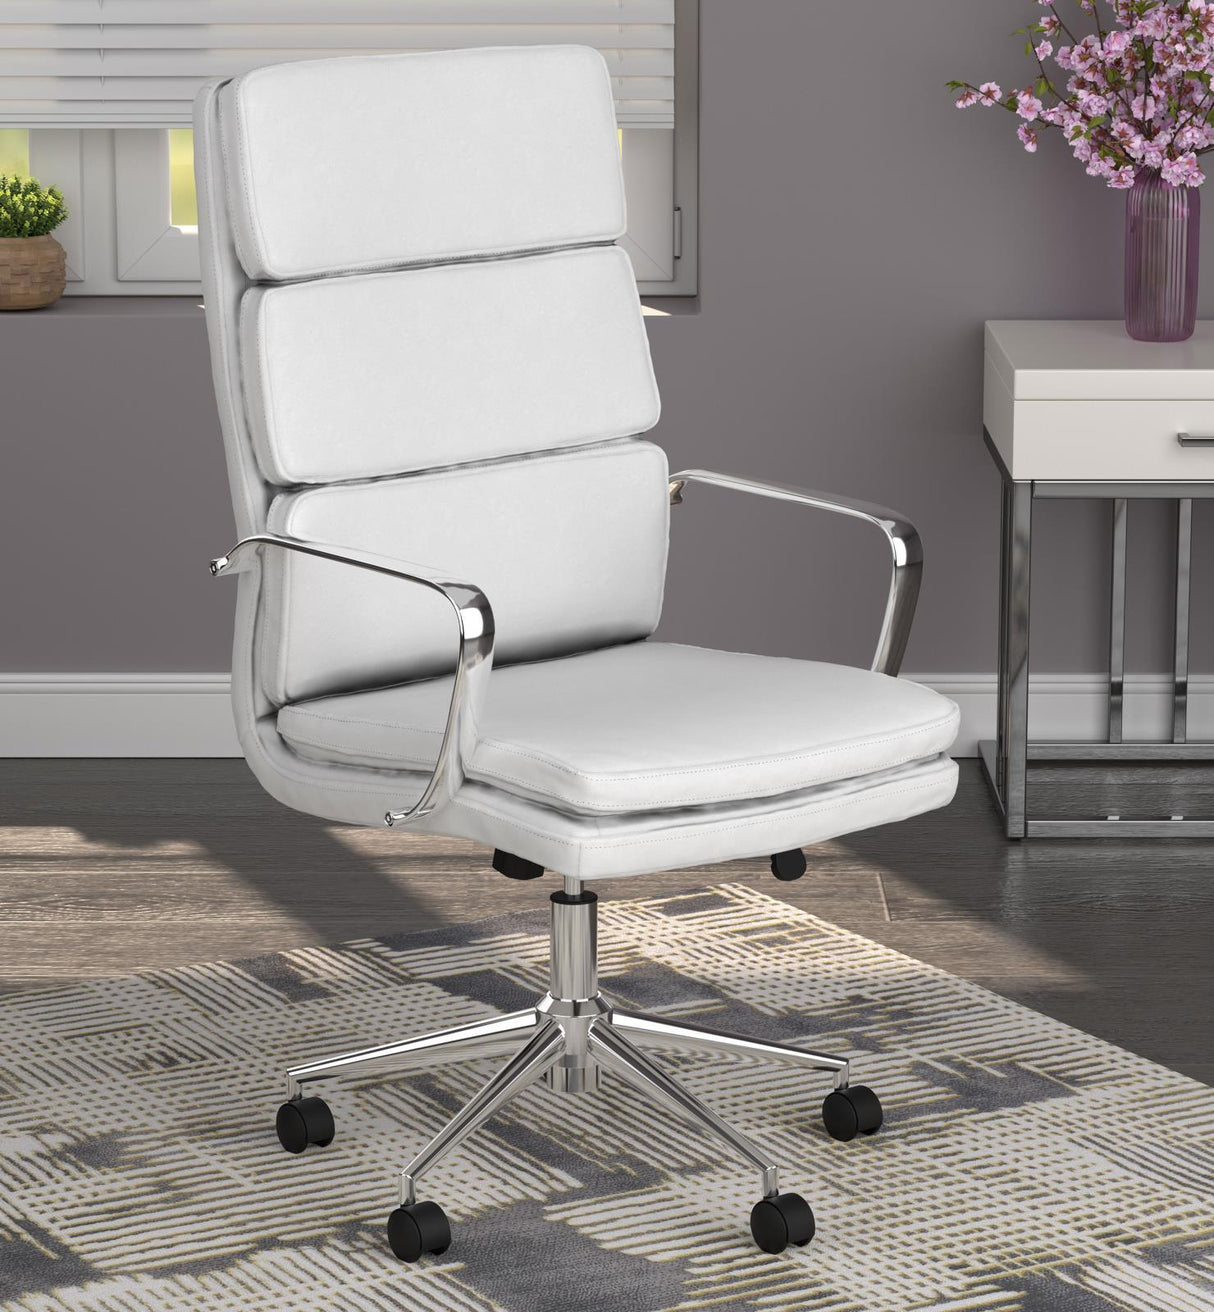 Chrome Upholstered Office Chair 801746 - Ella Furniture